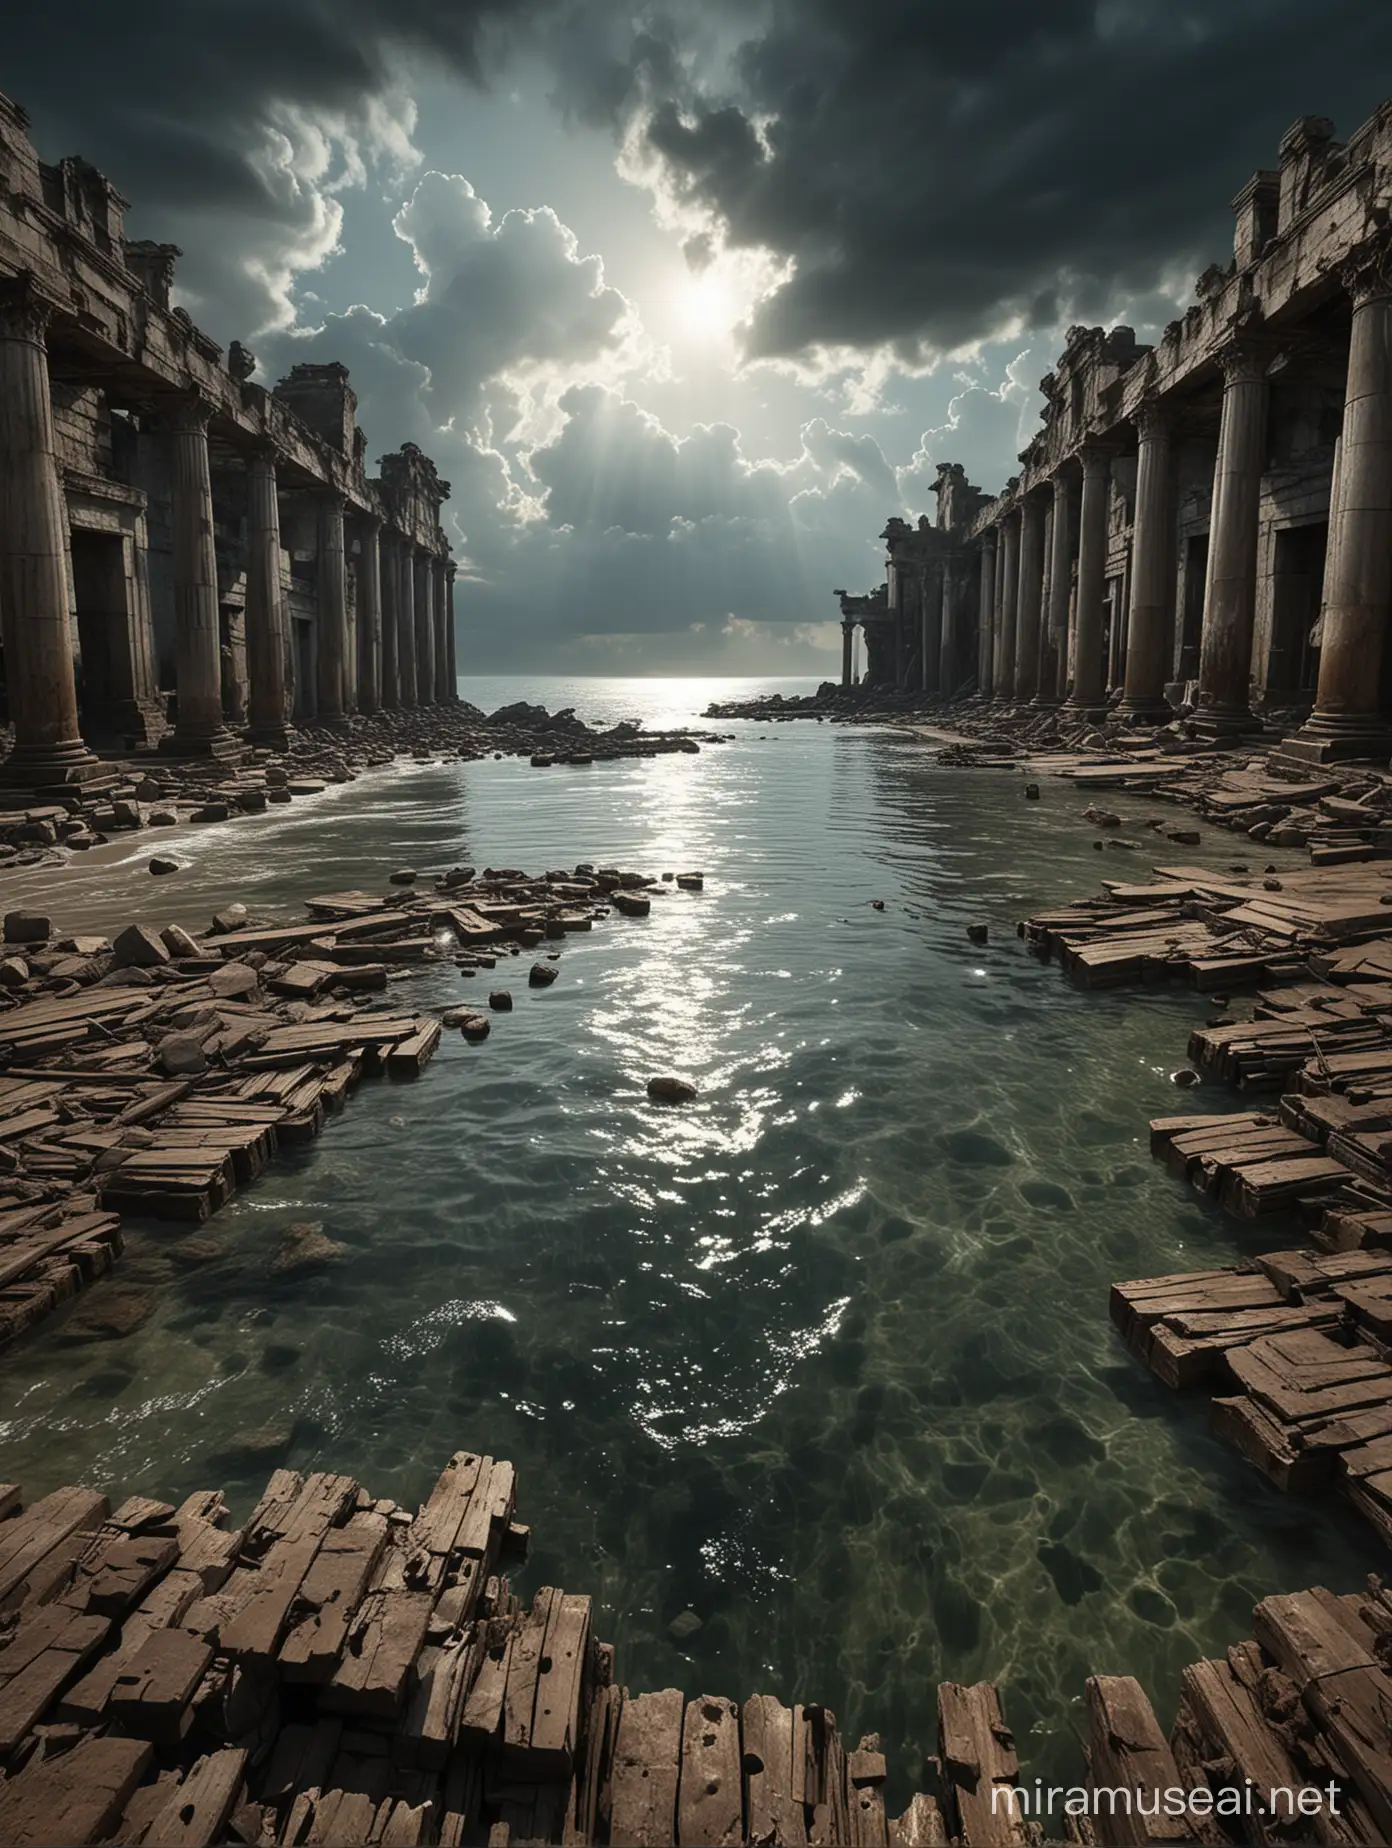 Mystical Ruins Abandoned Seascape with Weathered Architecture and Stormy Sky